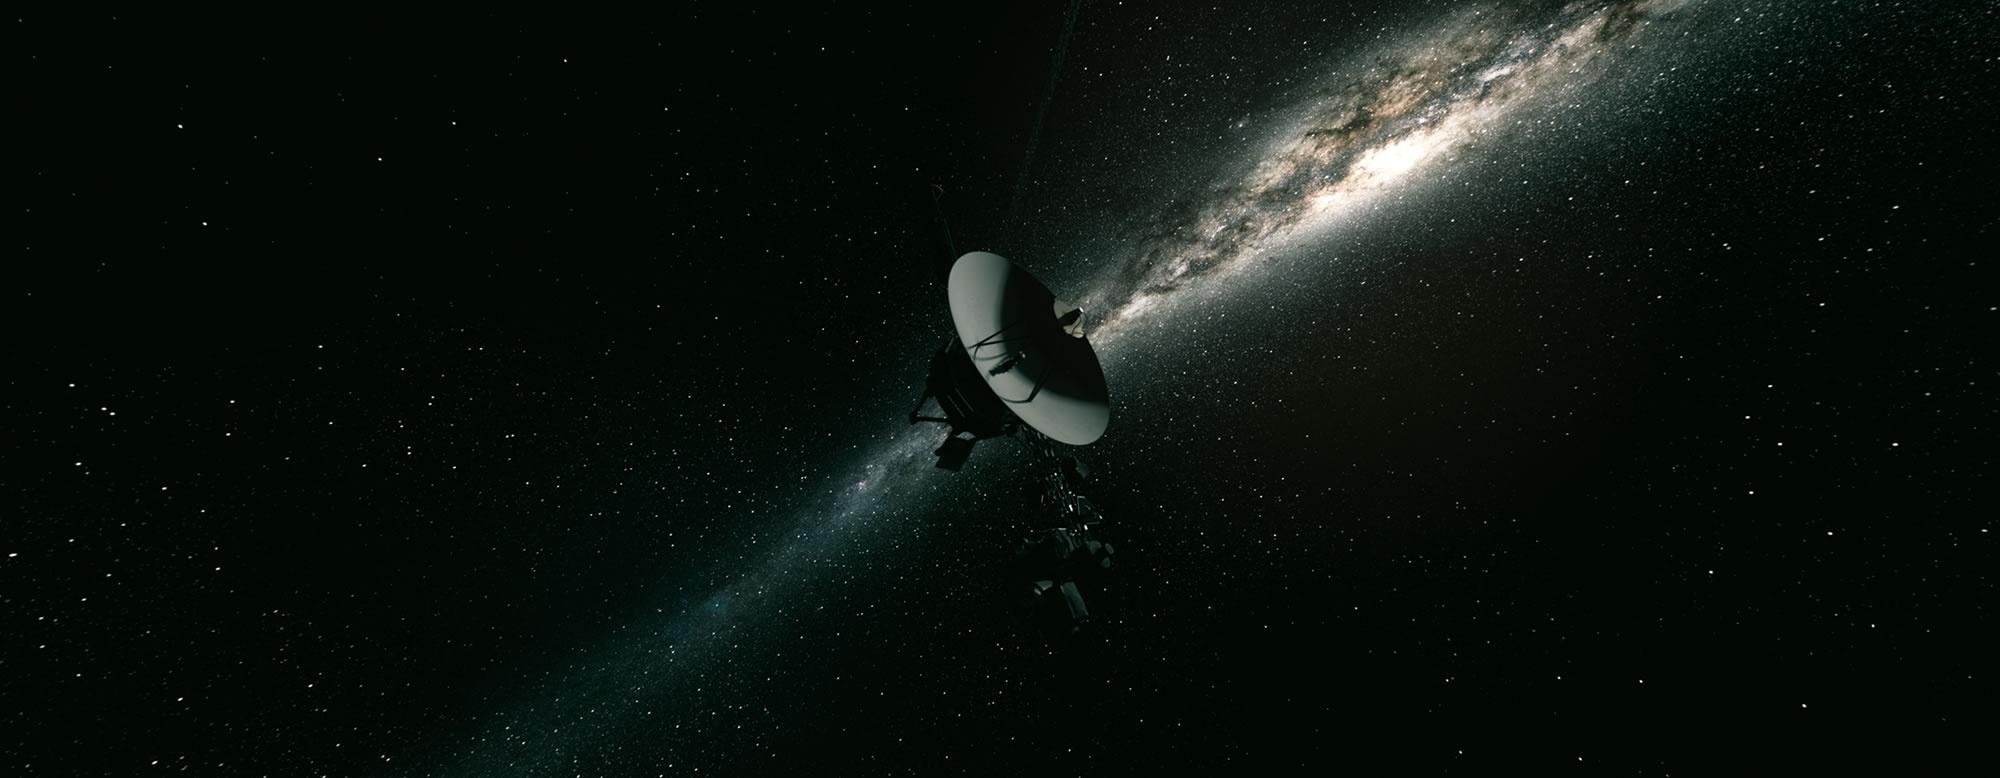 Voyager spacecraft with galaxy in background